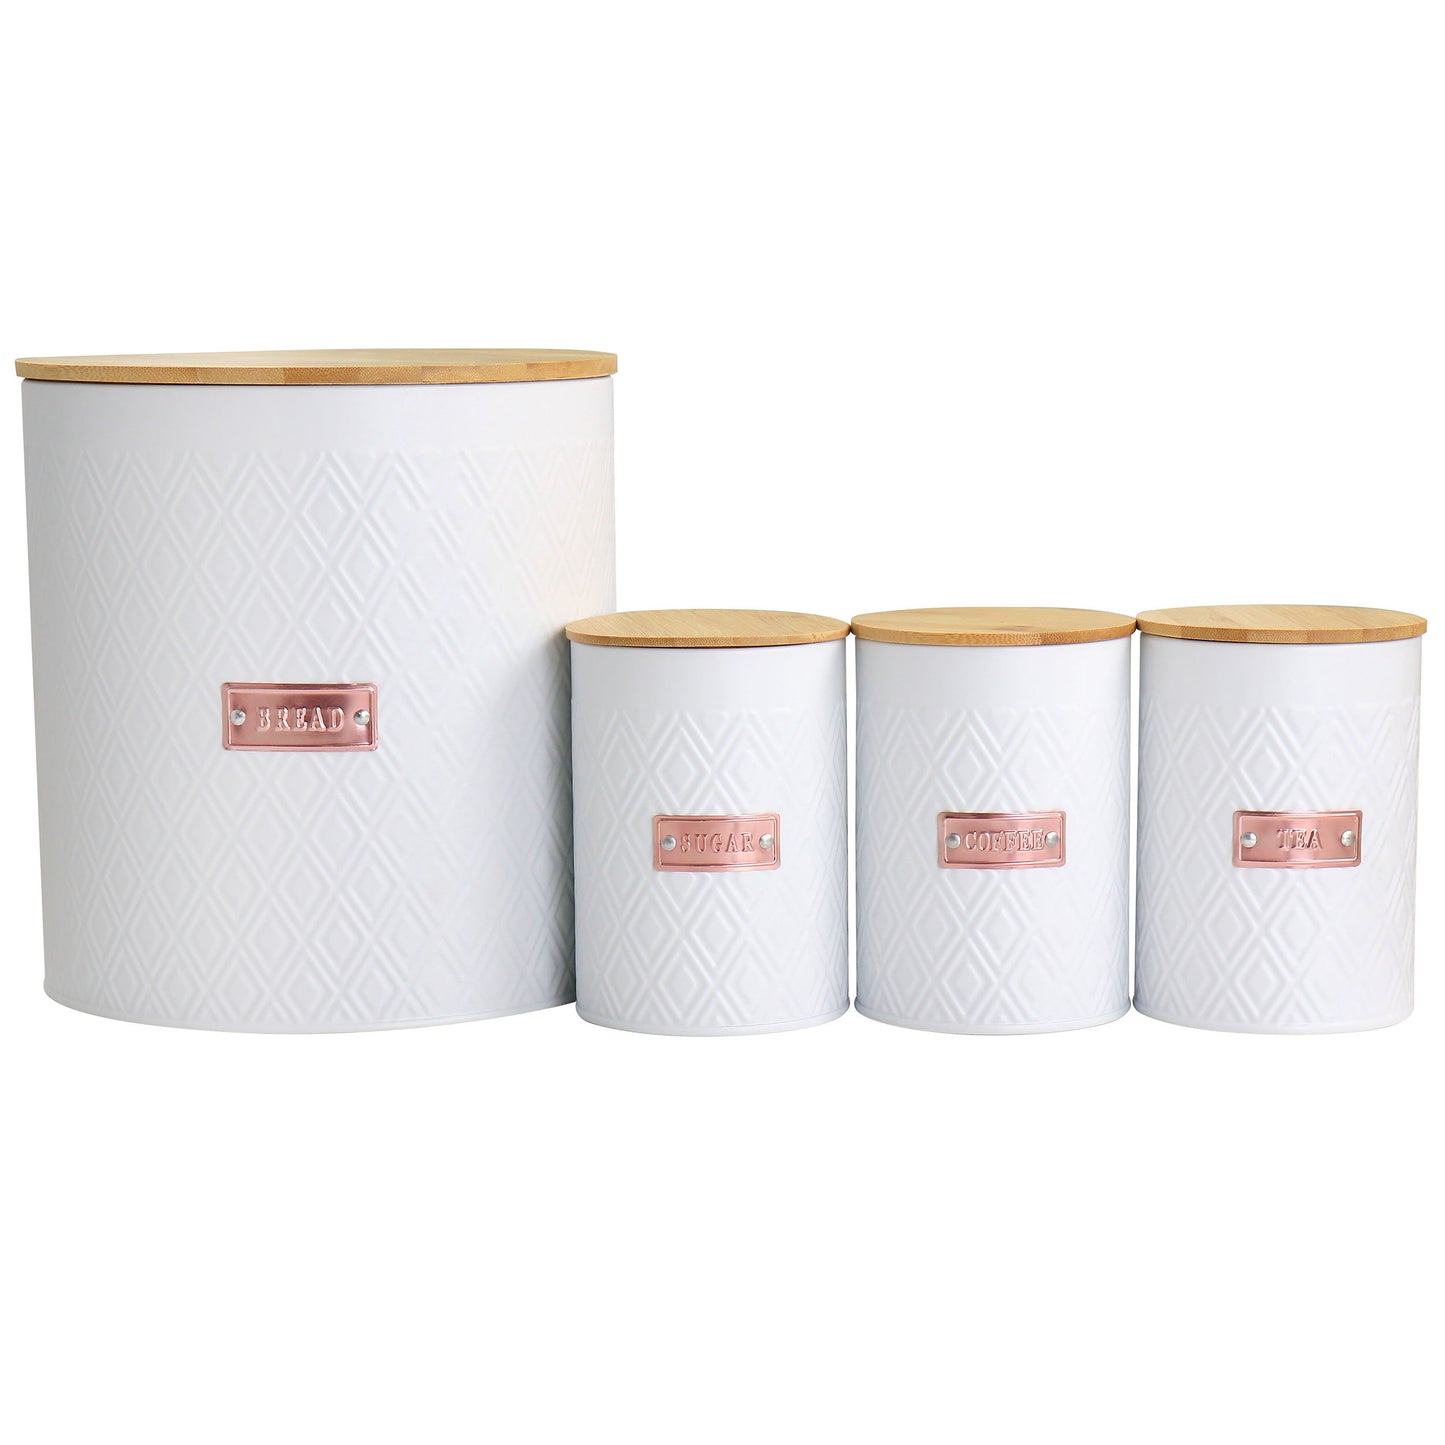 MegaChef MegaChef Kitchen Food Storage and Organization 4 Piece Argyle Canister Set in White with Bamboo Lids